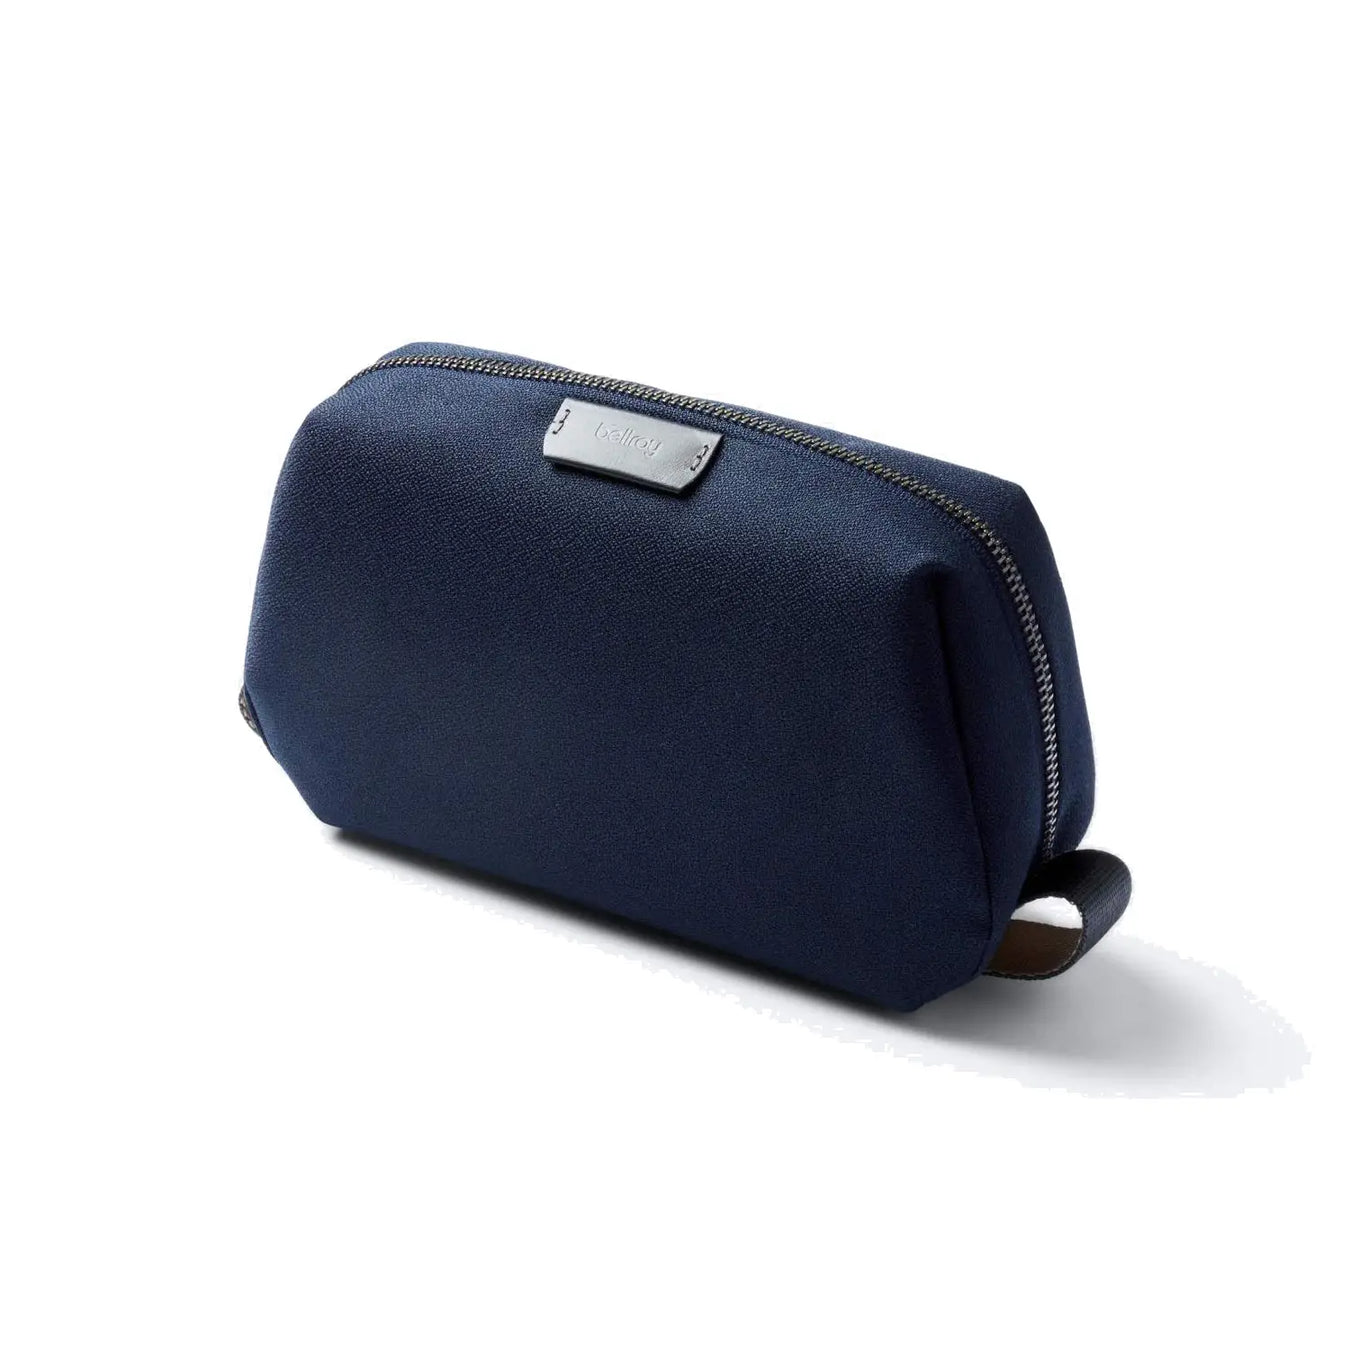 Bellroy's Toiletry Bags